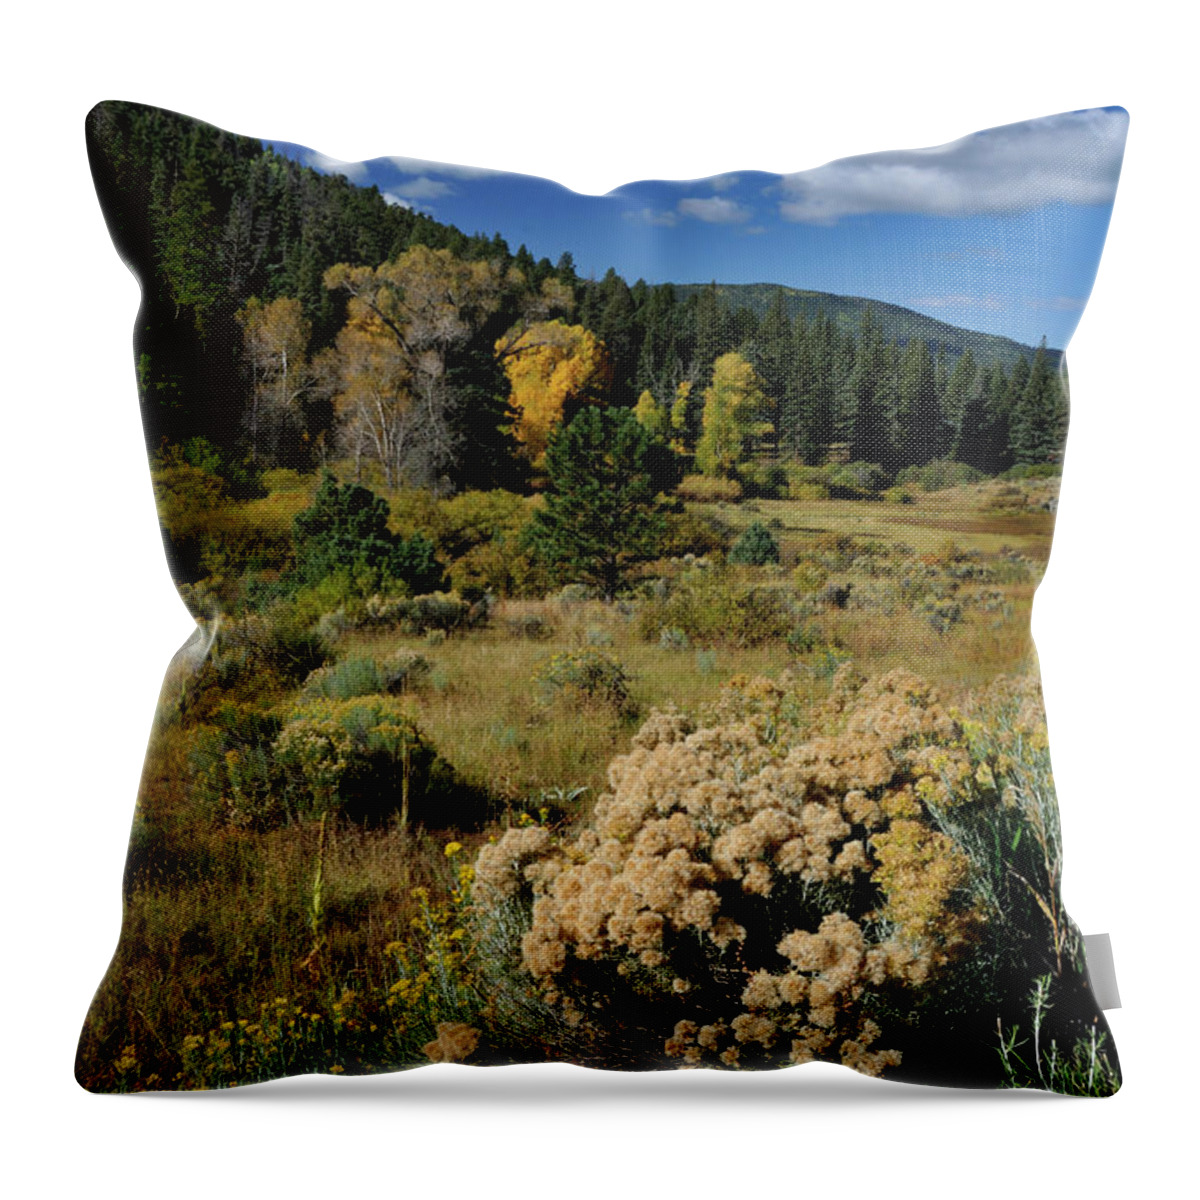 Landscape Throw Pillow featuring the photograph Autumn Morning In The Canyon by Ron Cline